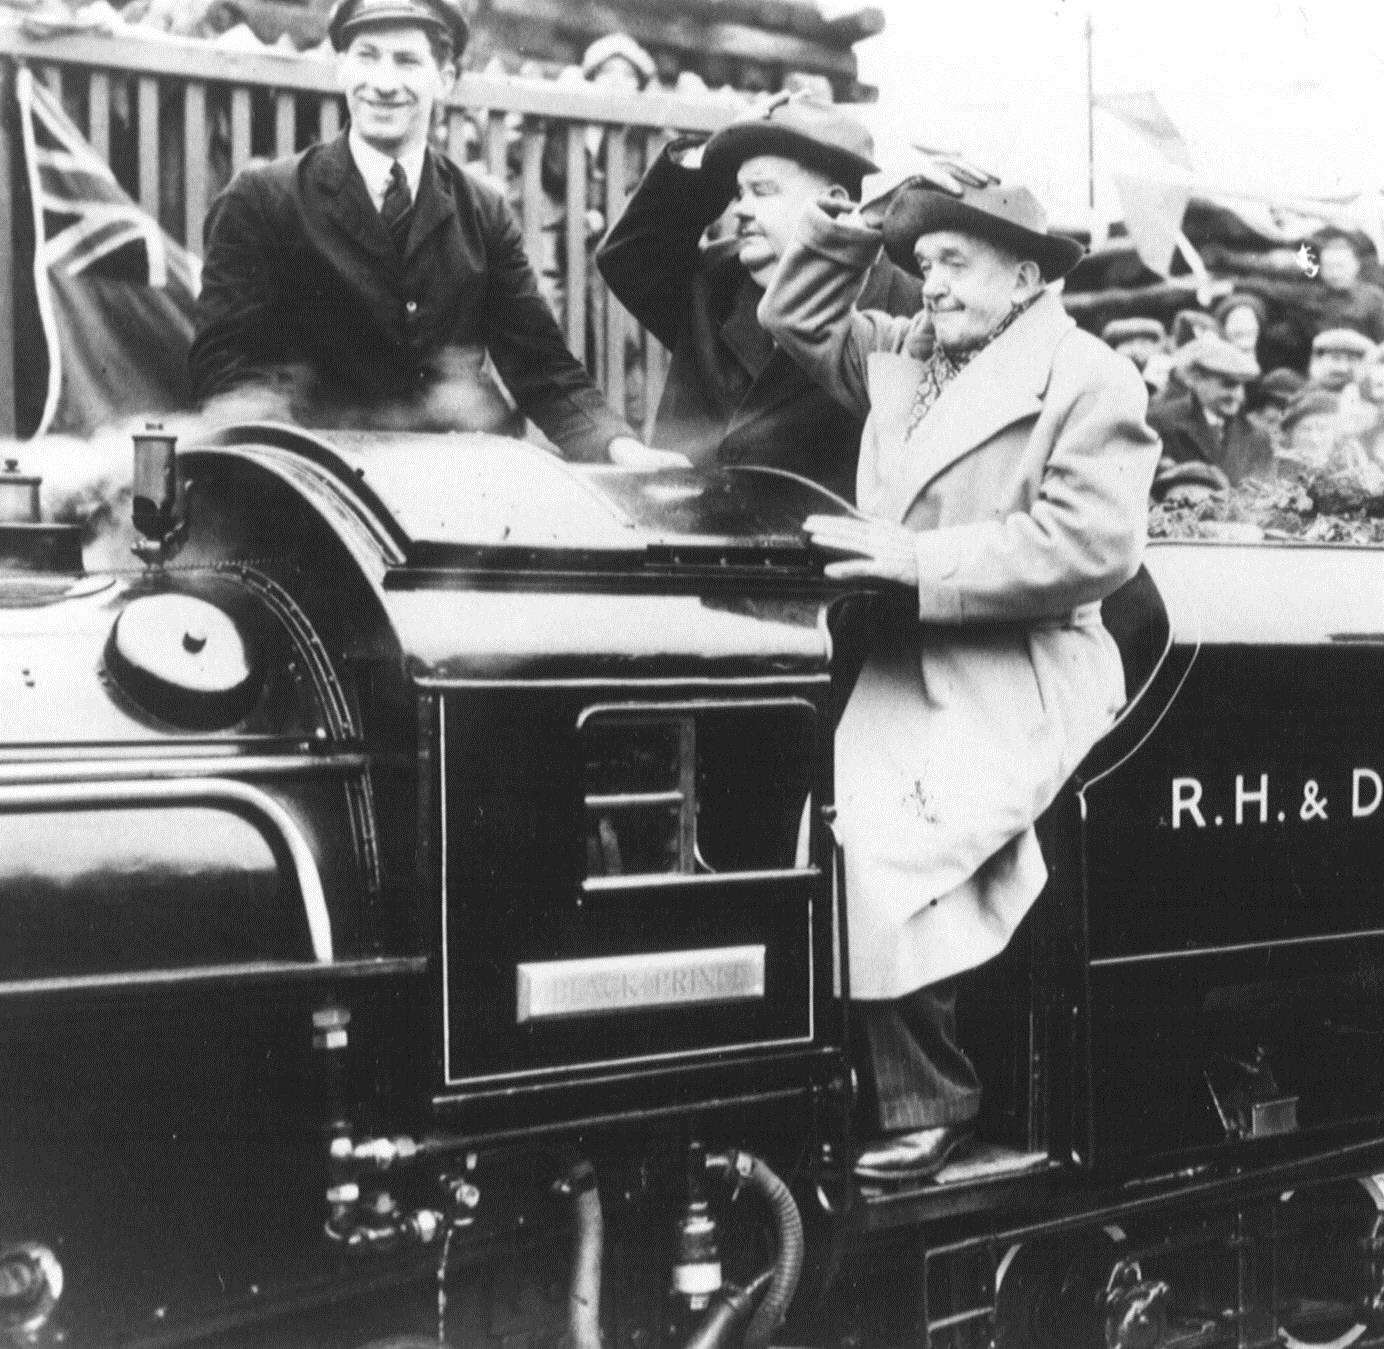 Laurel & Hardy at the re-opening of the Romney, Hythe and Dymchurch Railway in 1947